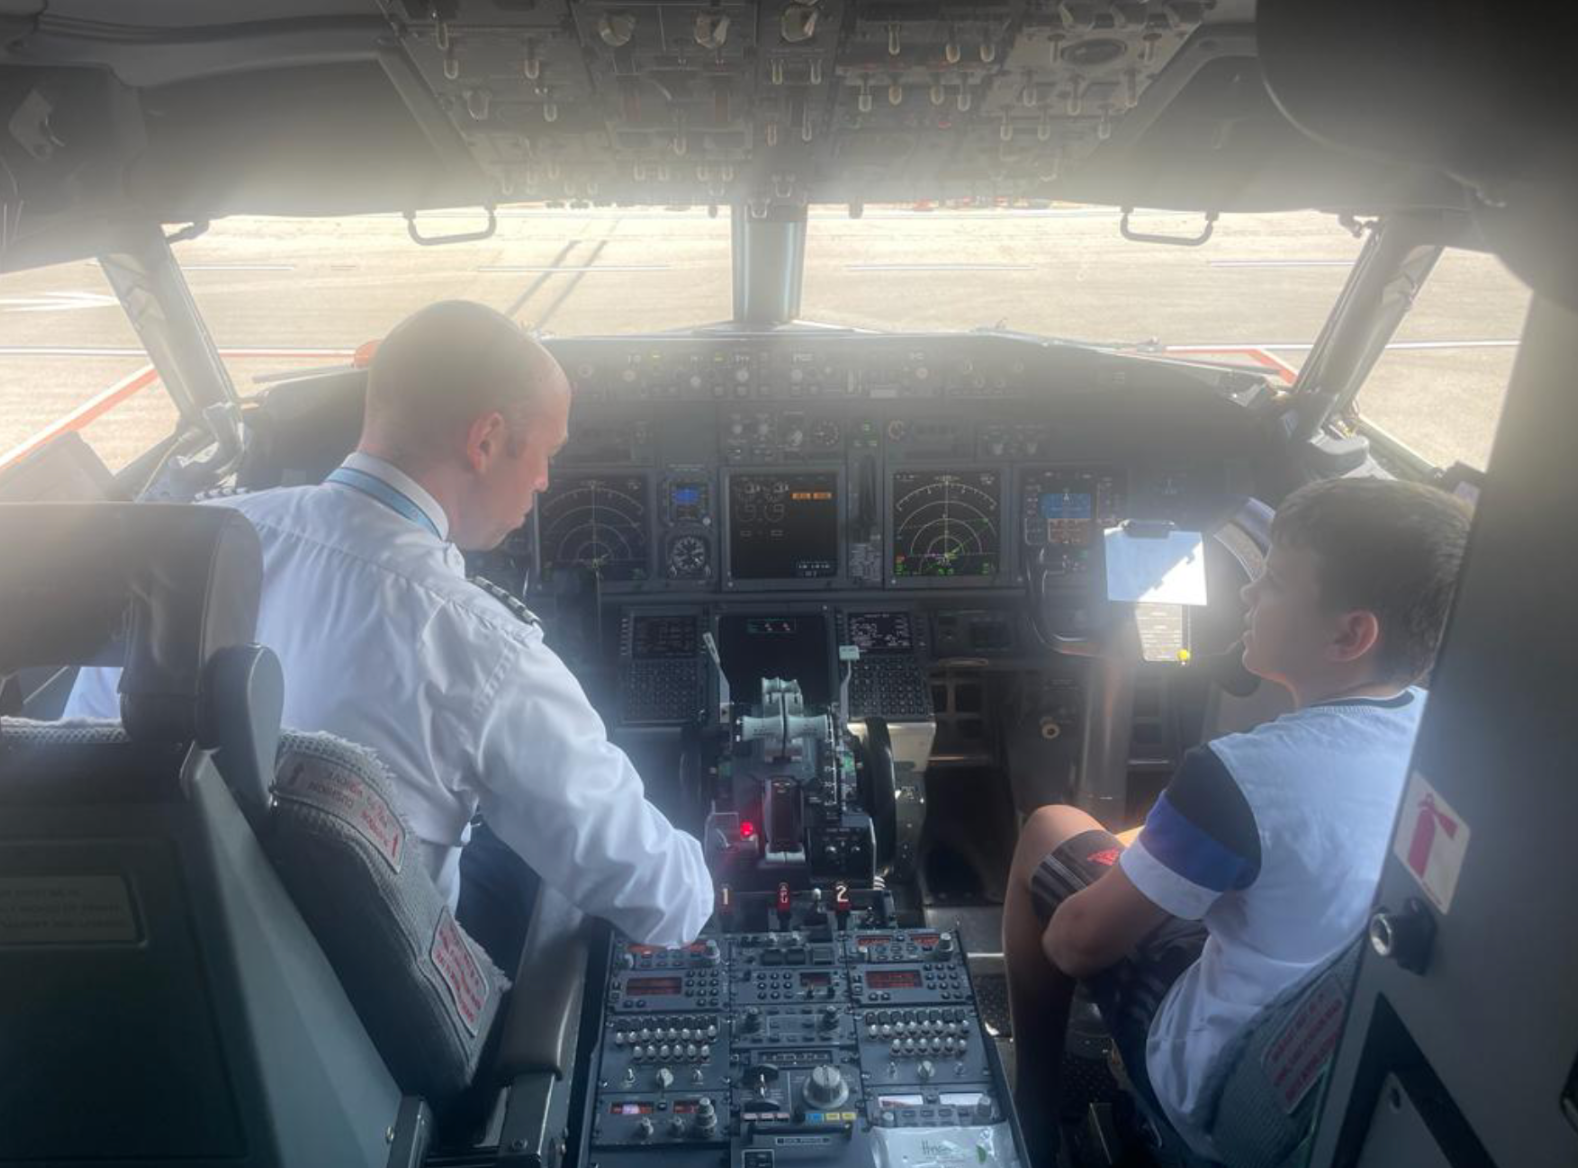 11-year-old Danny was ‘over the moon’ to be shown round the cockpit as the Magarottos’ flight was held on the tarmac